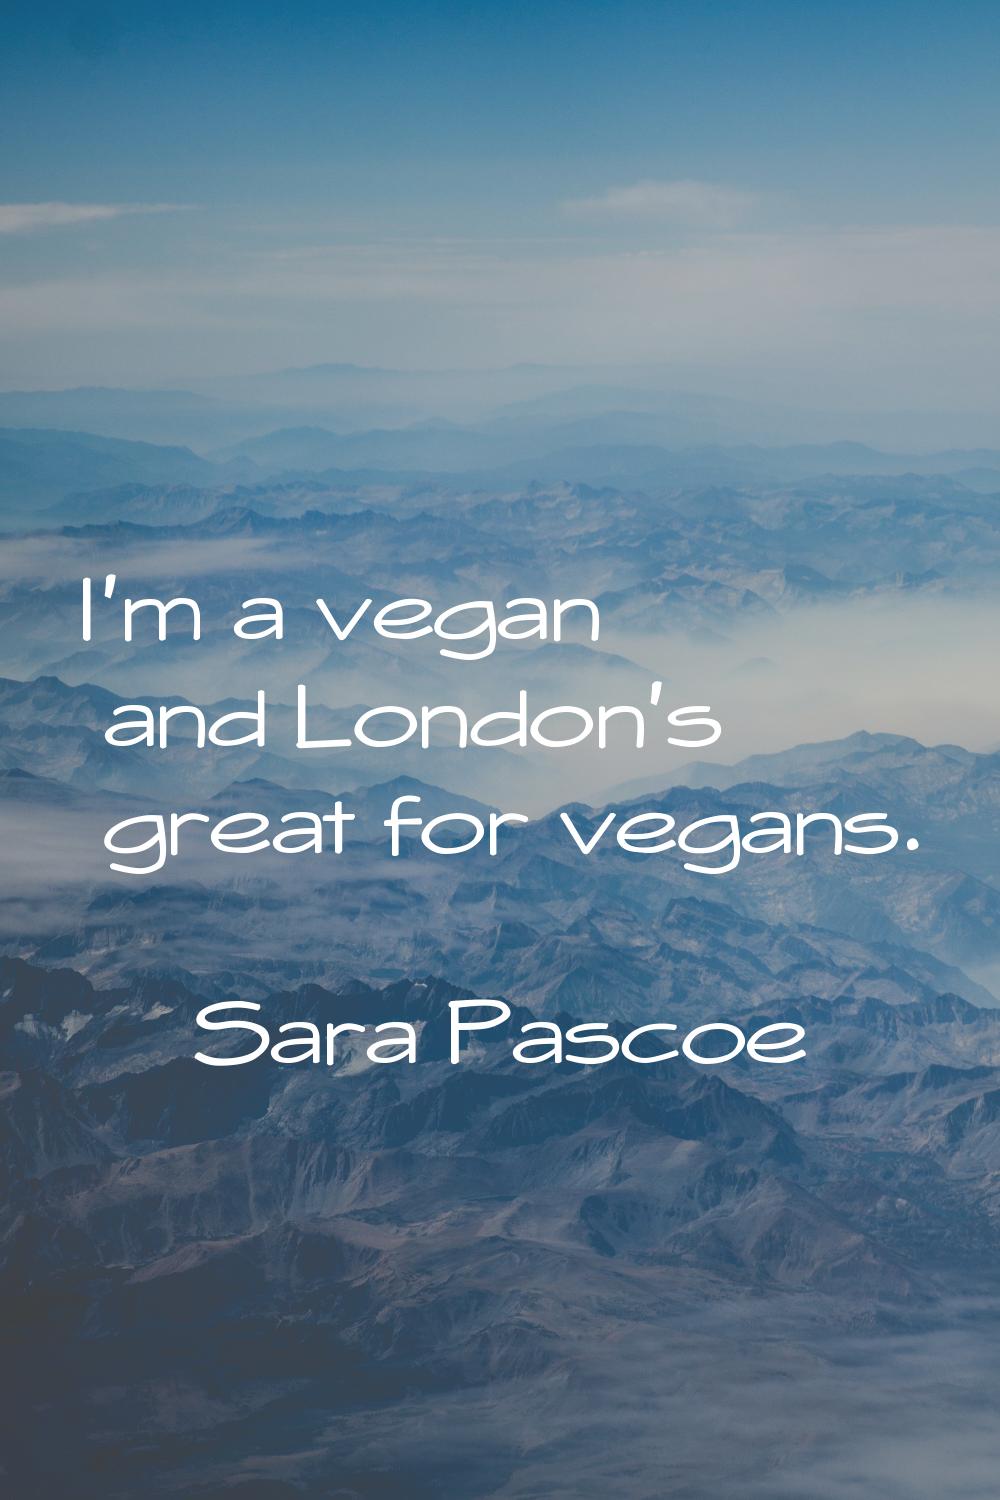 I'm a vegan and London's great for vegans.